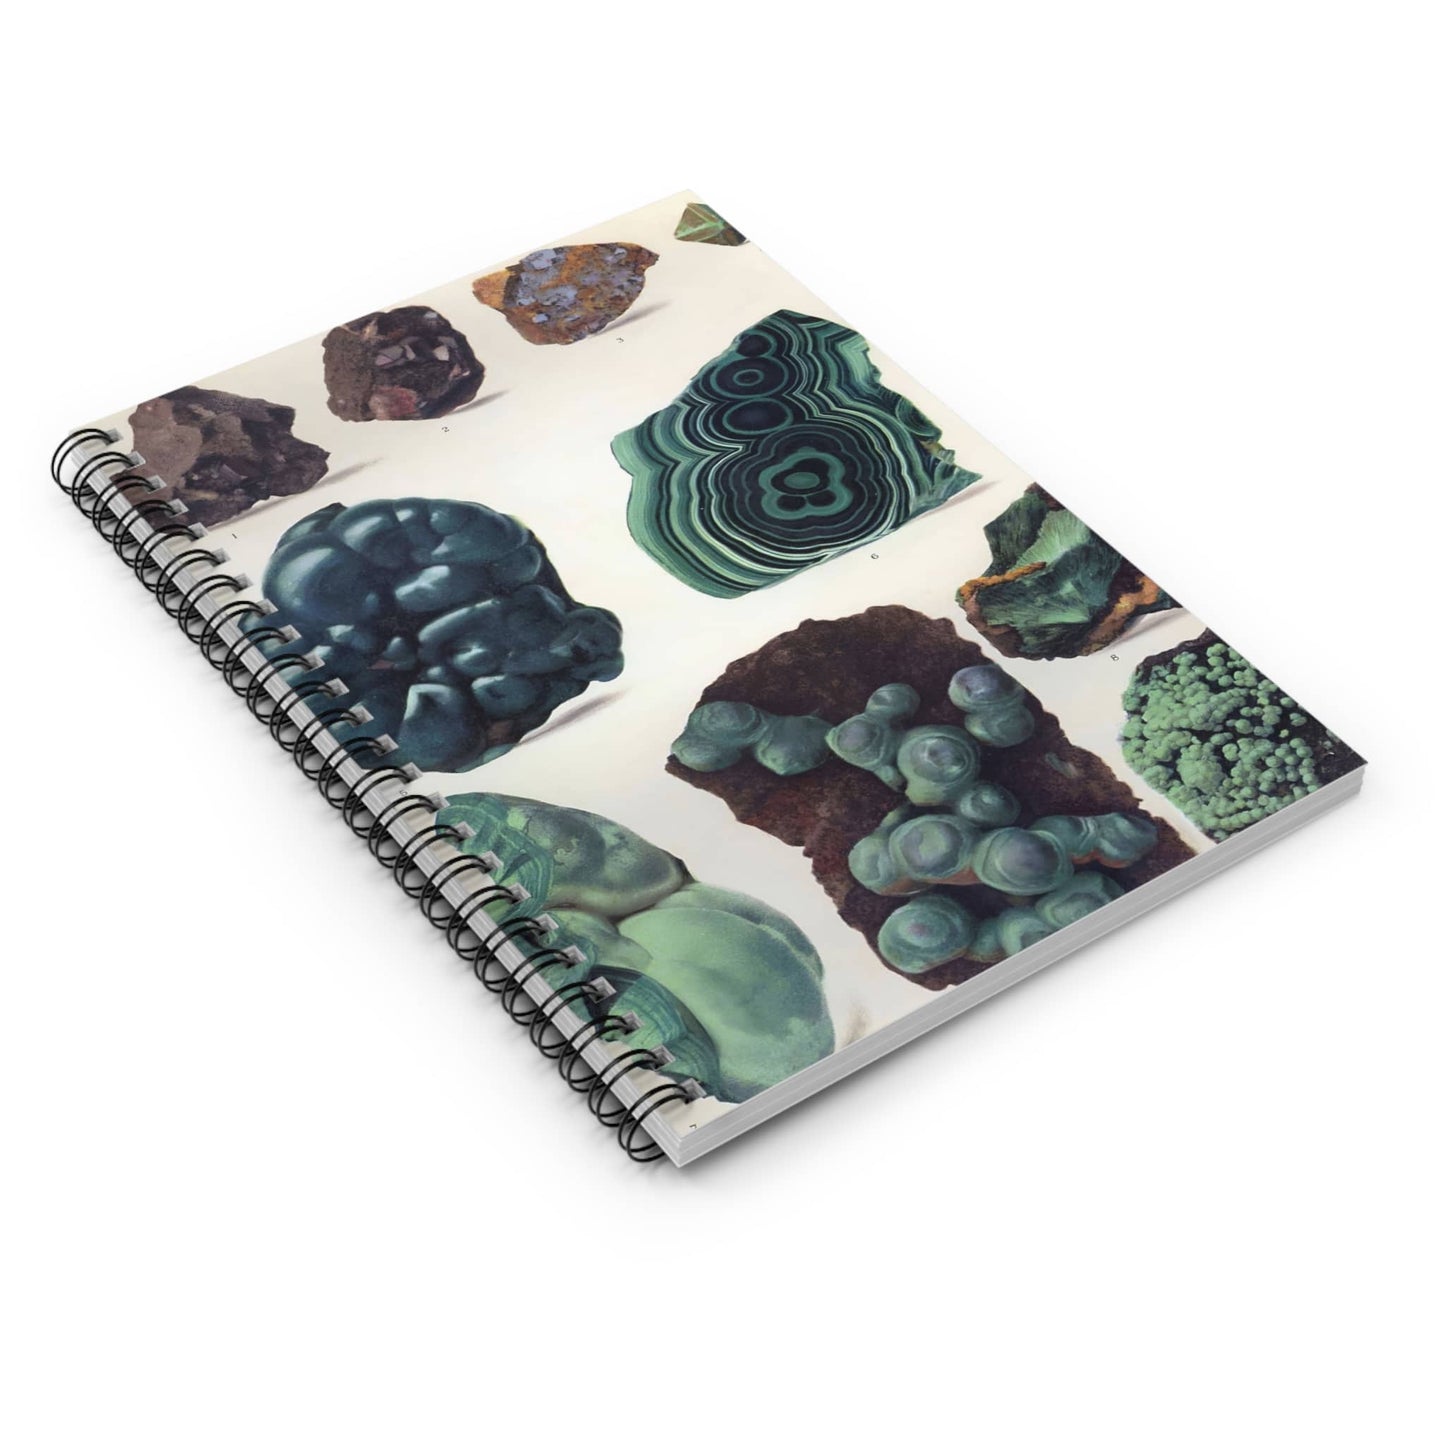 Dark Rocks and Jade Spiral Notebook Laying Flat on White Surface